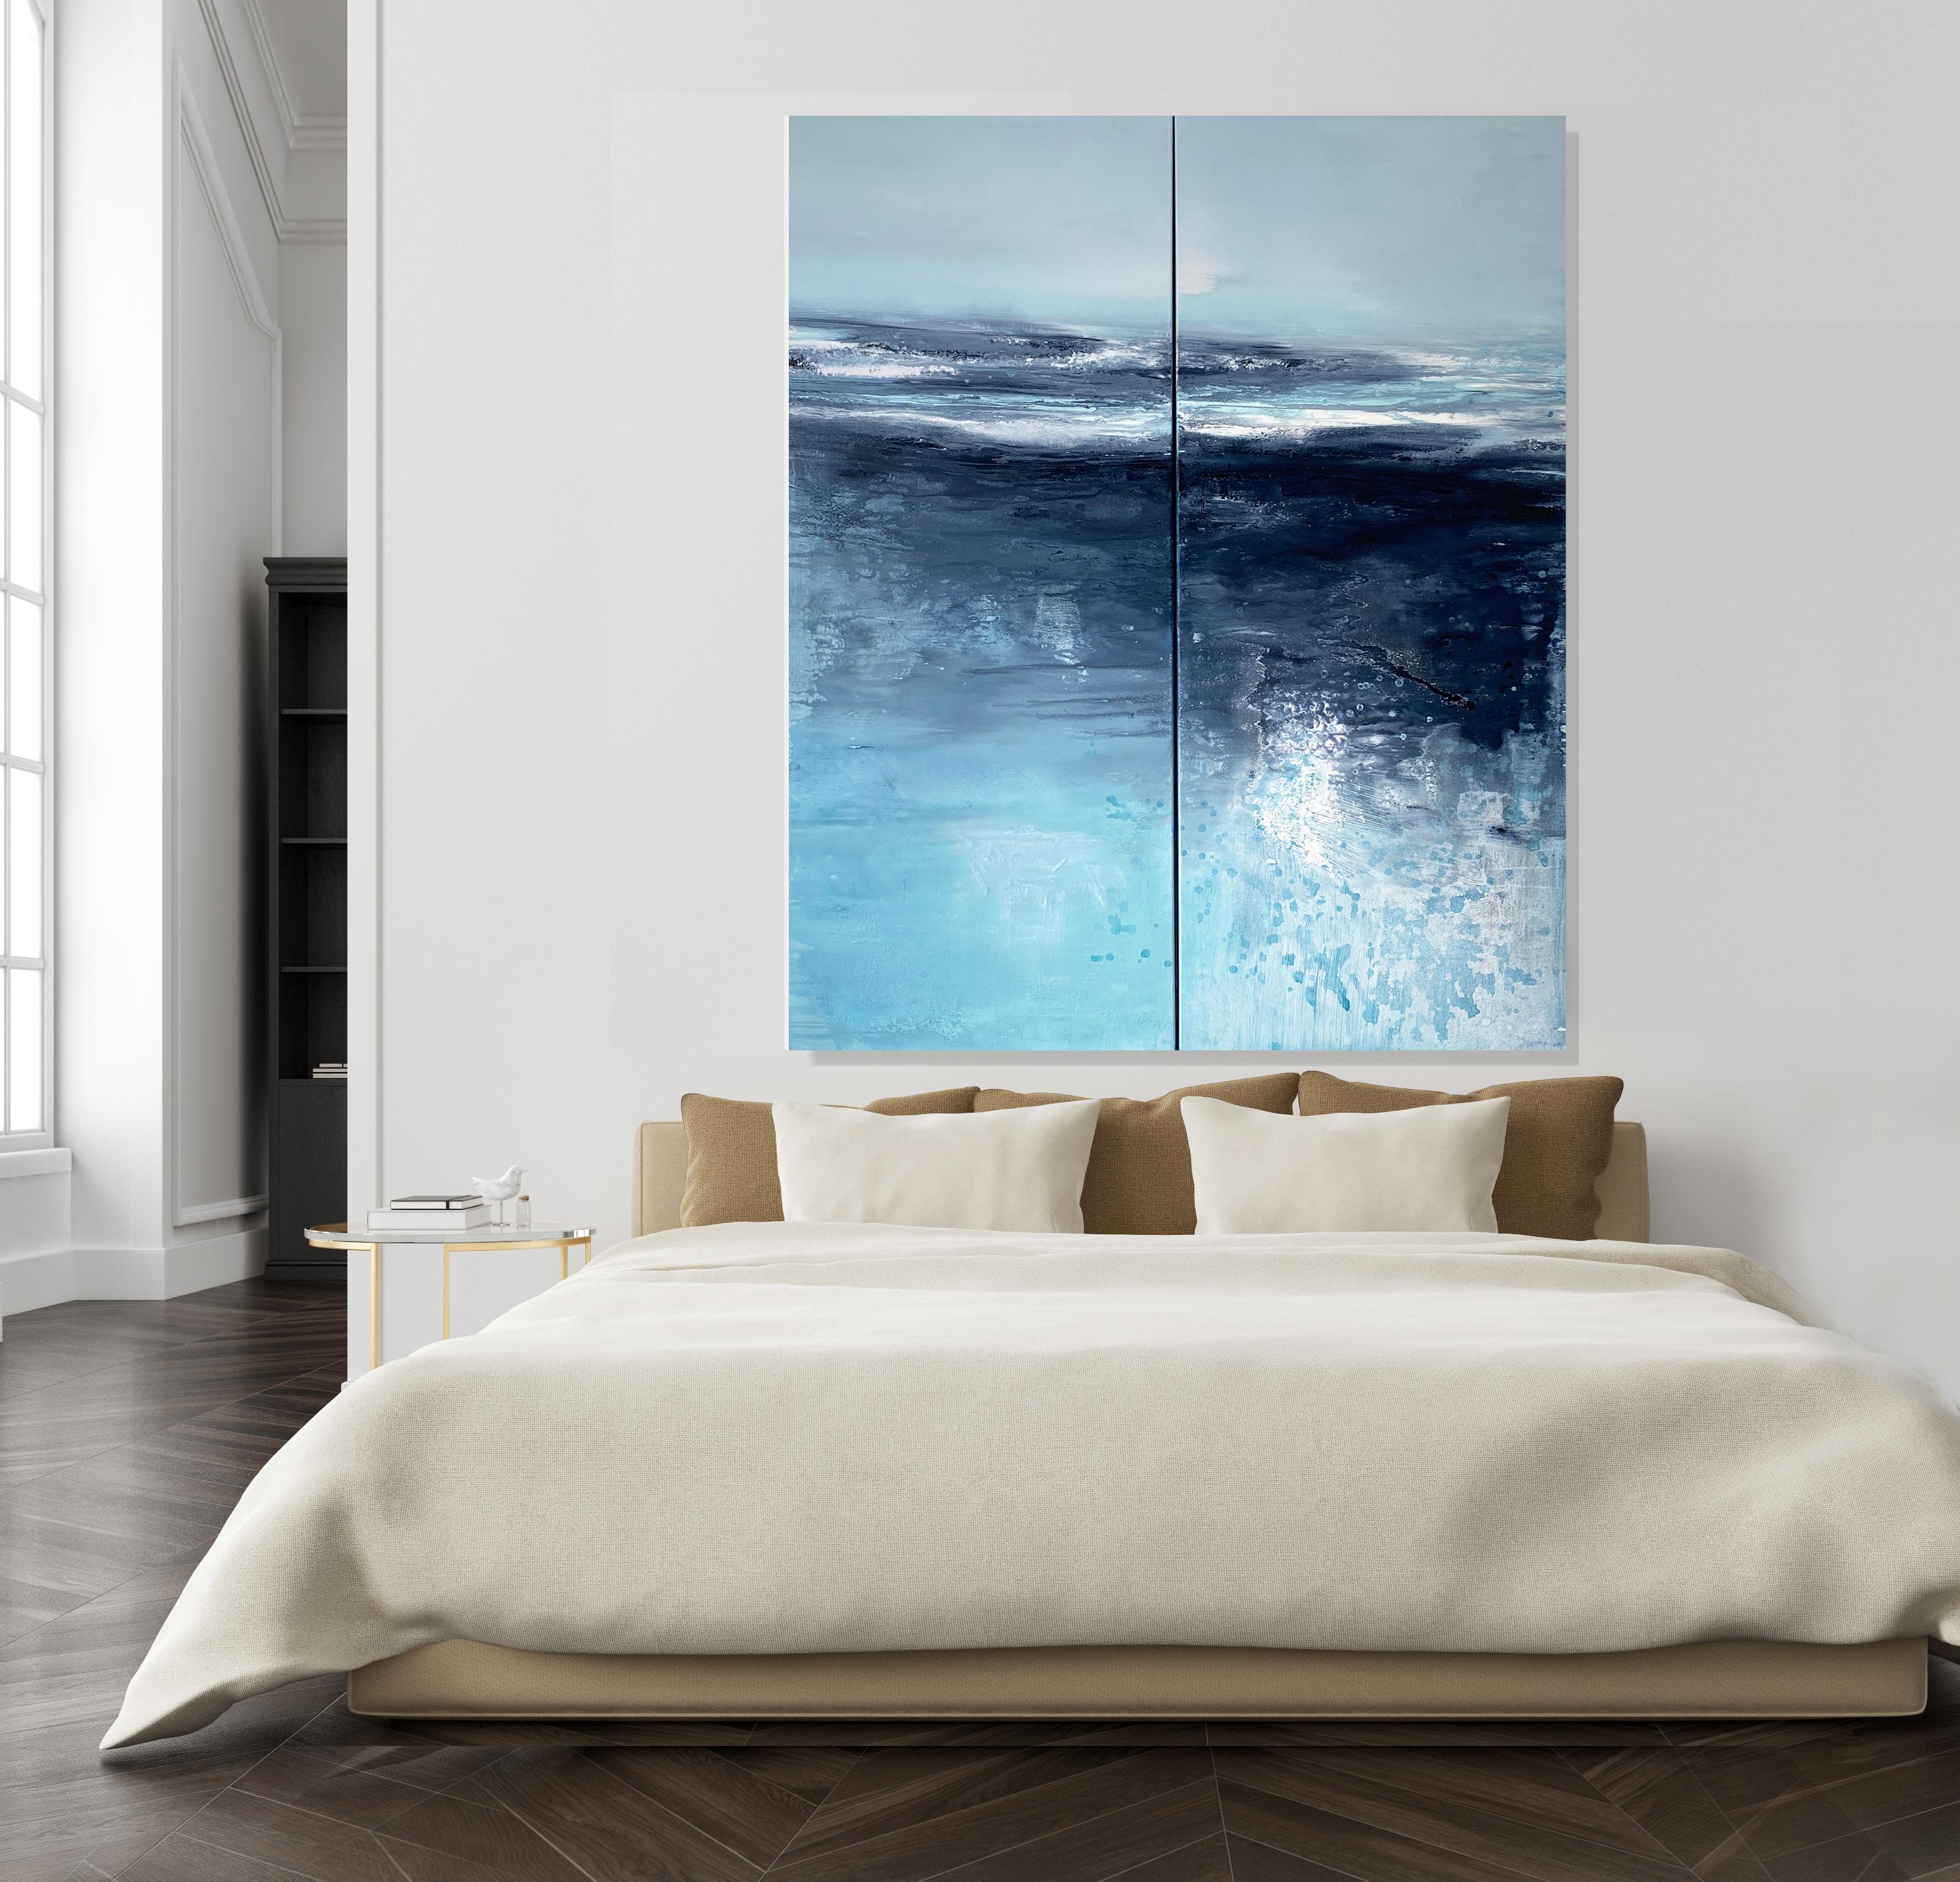 Aqua Waters at Night large scale double panel abstract expressionist painting For Sale 13